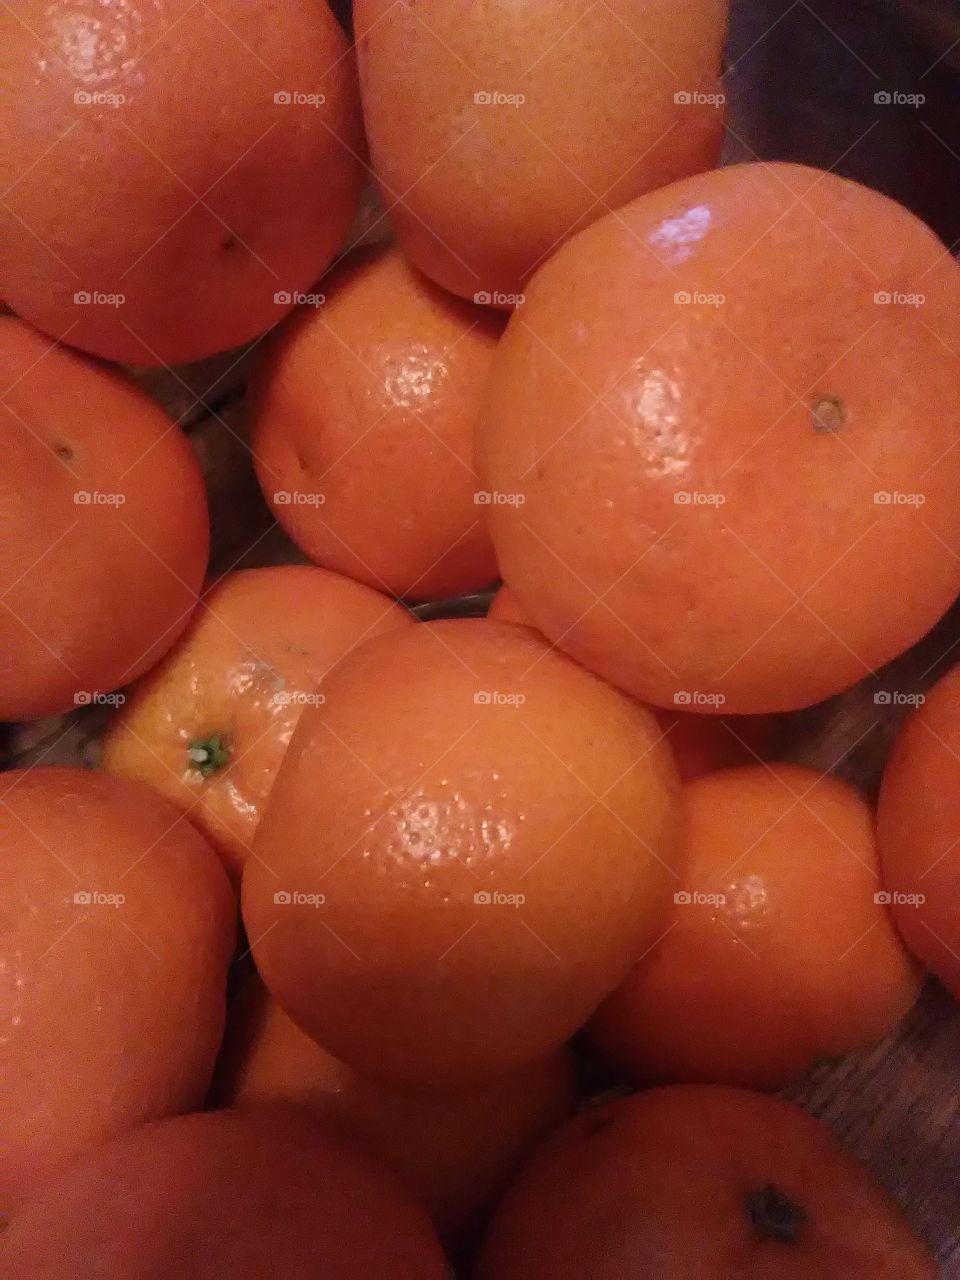 a beautiful fresh bowl of mandarins .. makes me  think of happy thoughts.